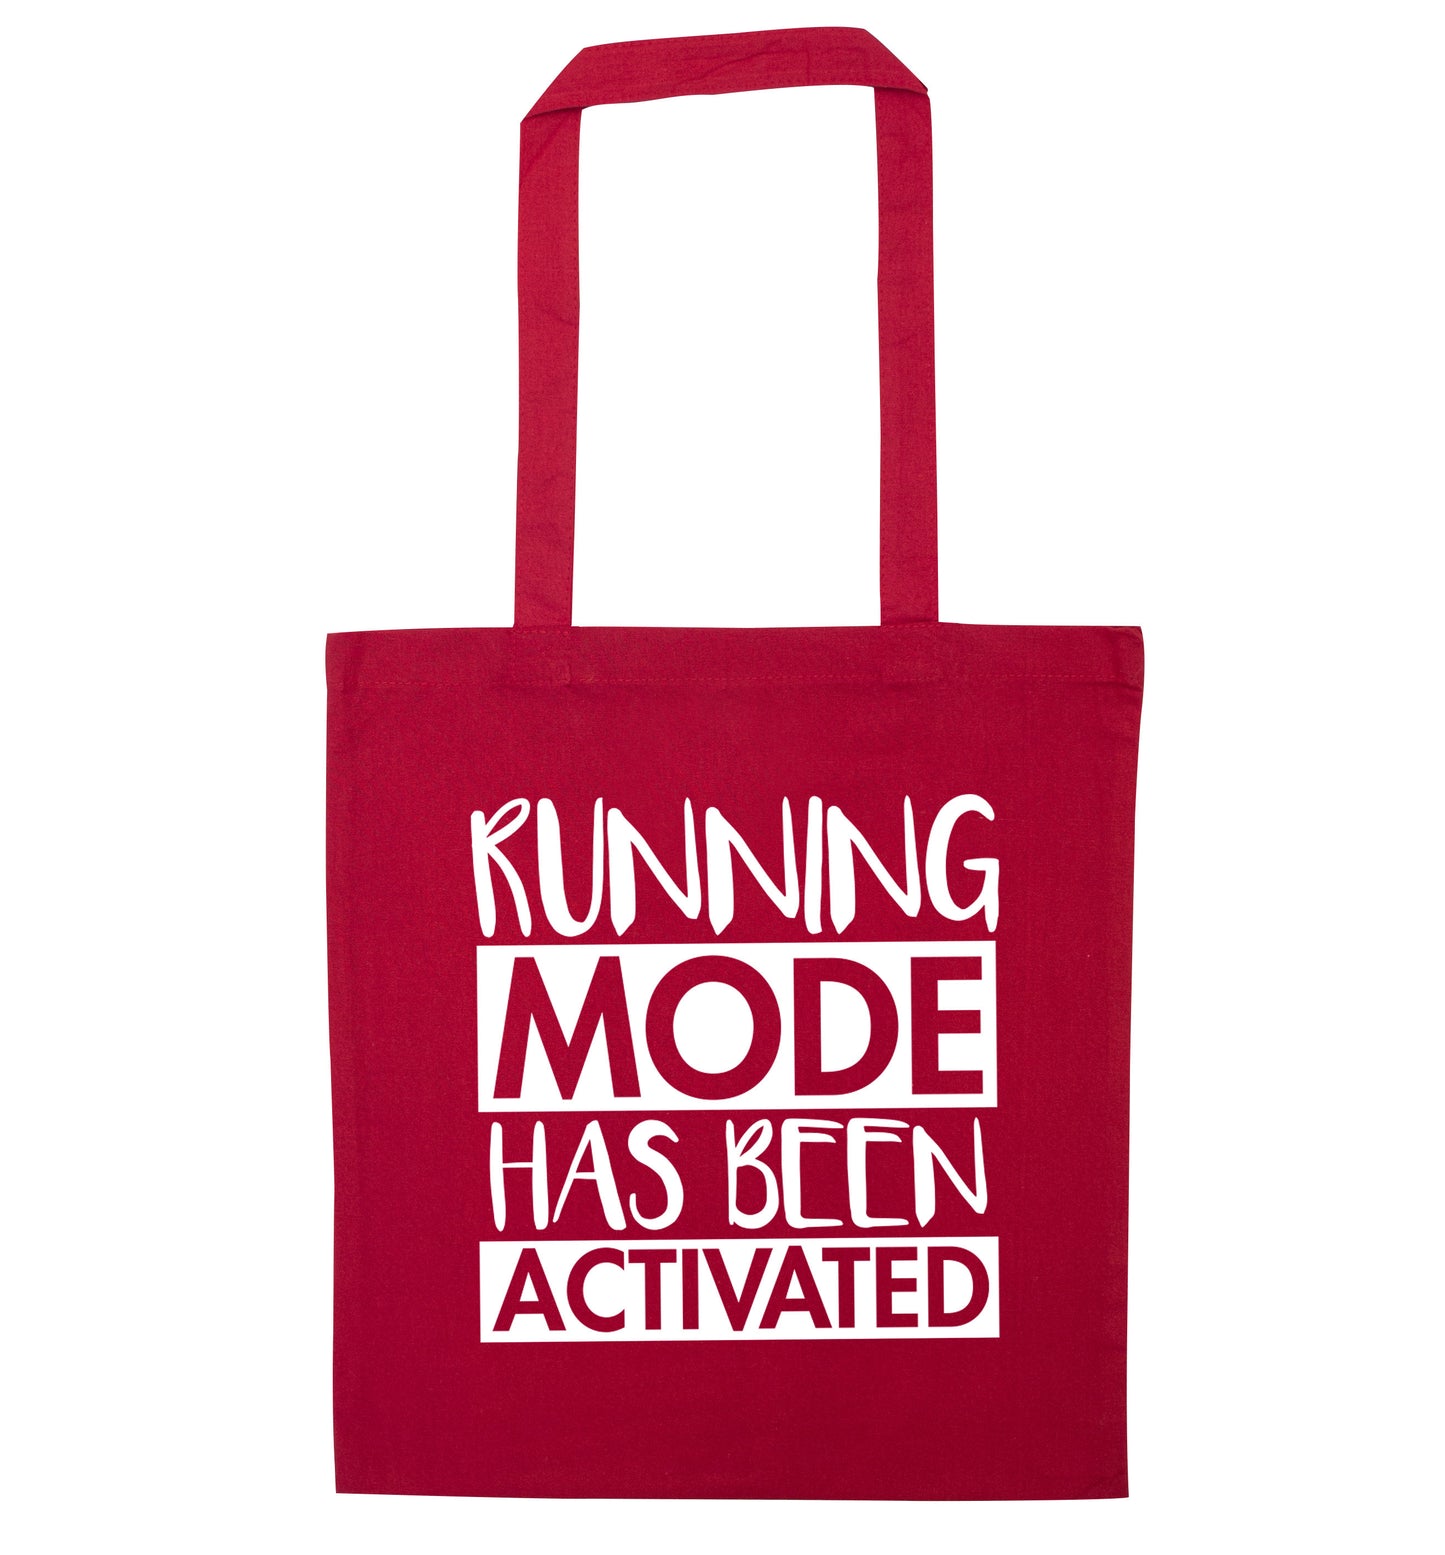 Running mode activated red tote bag